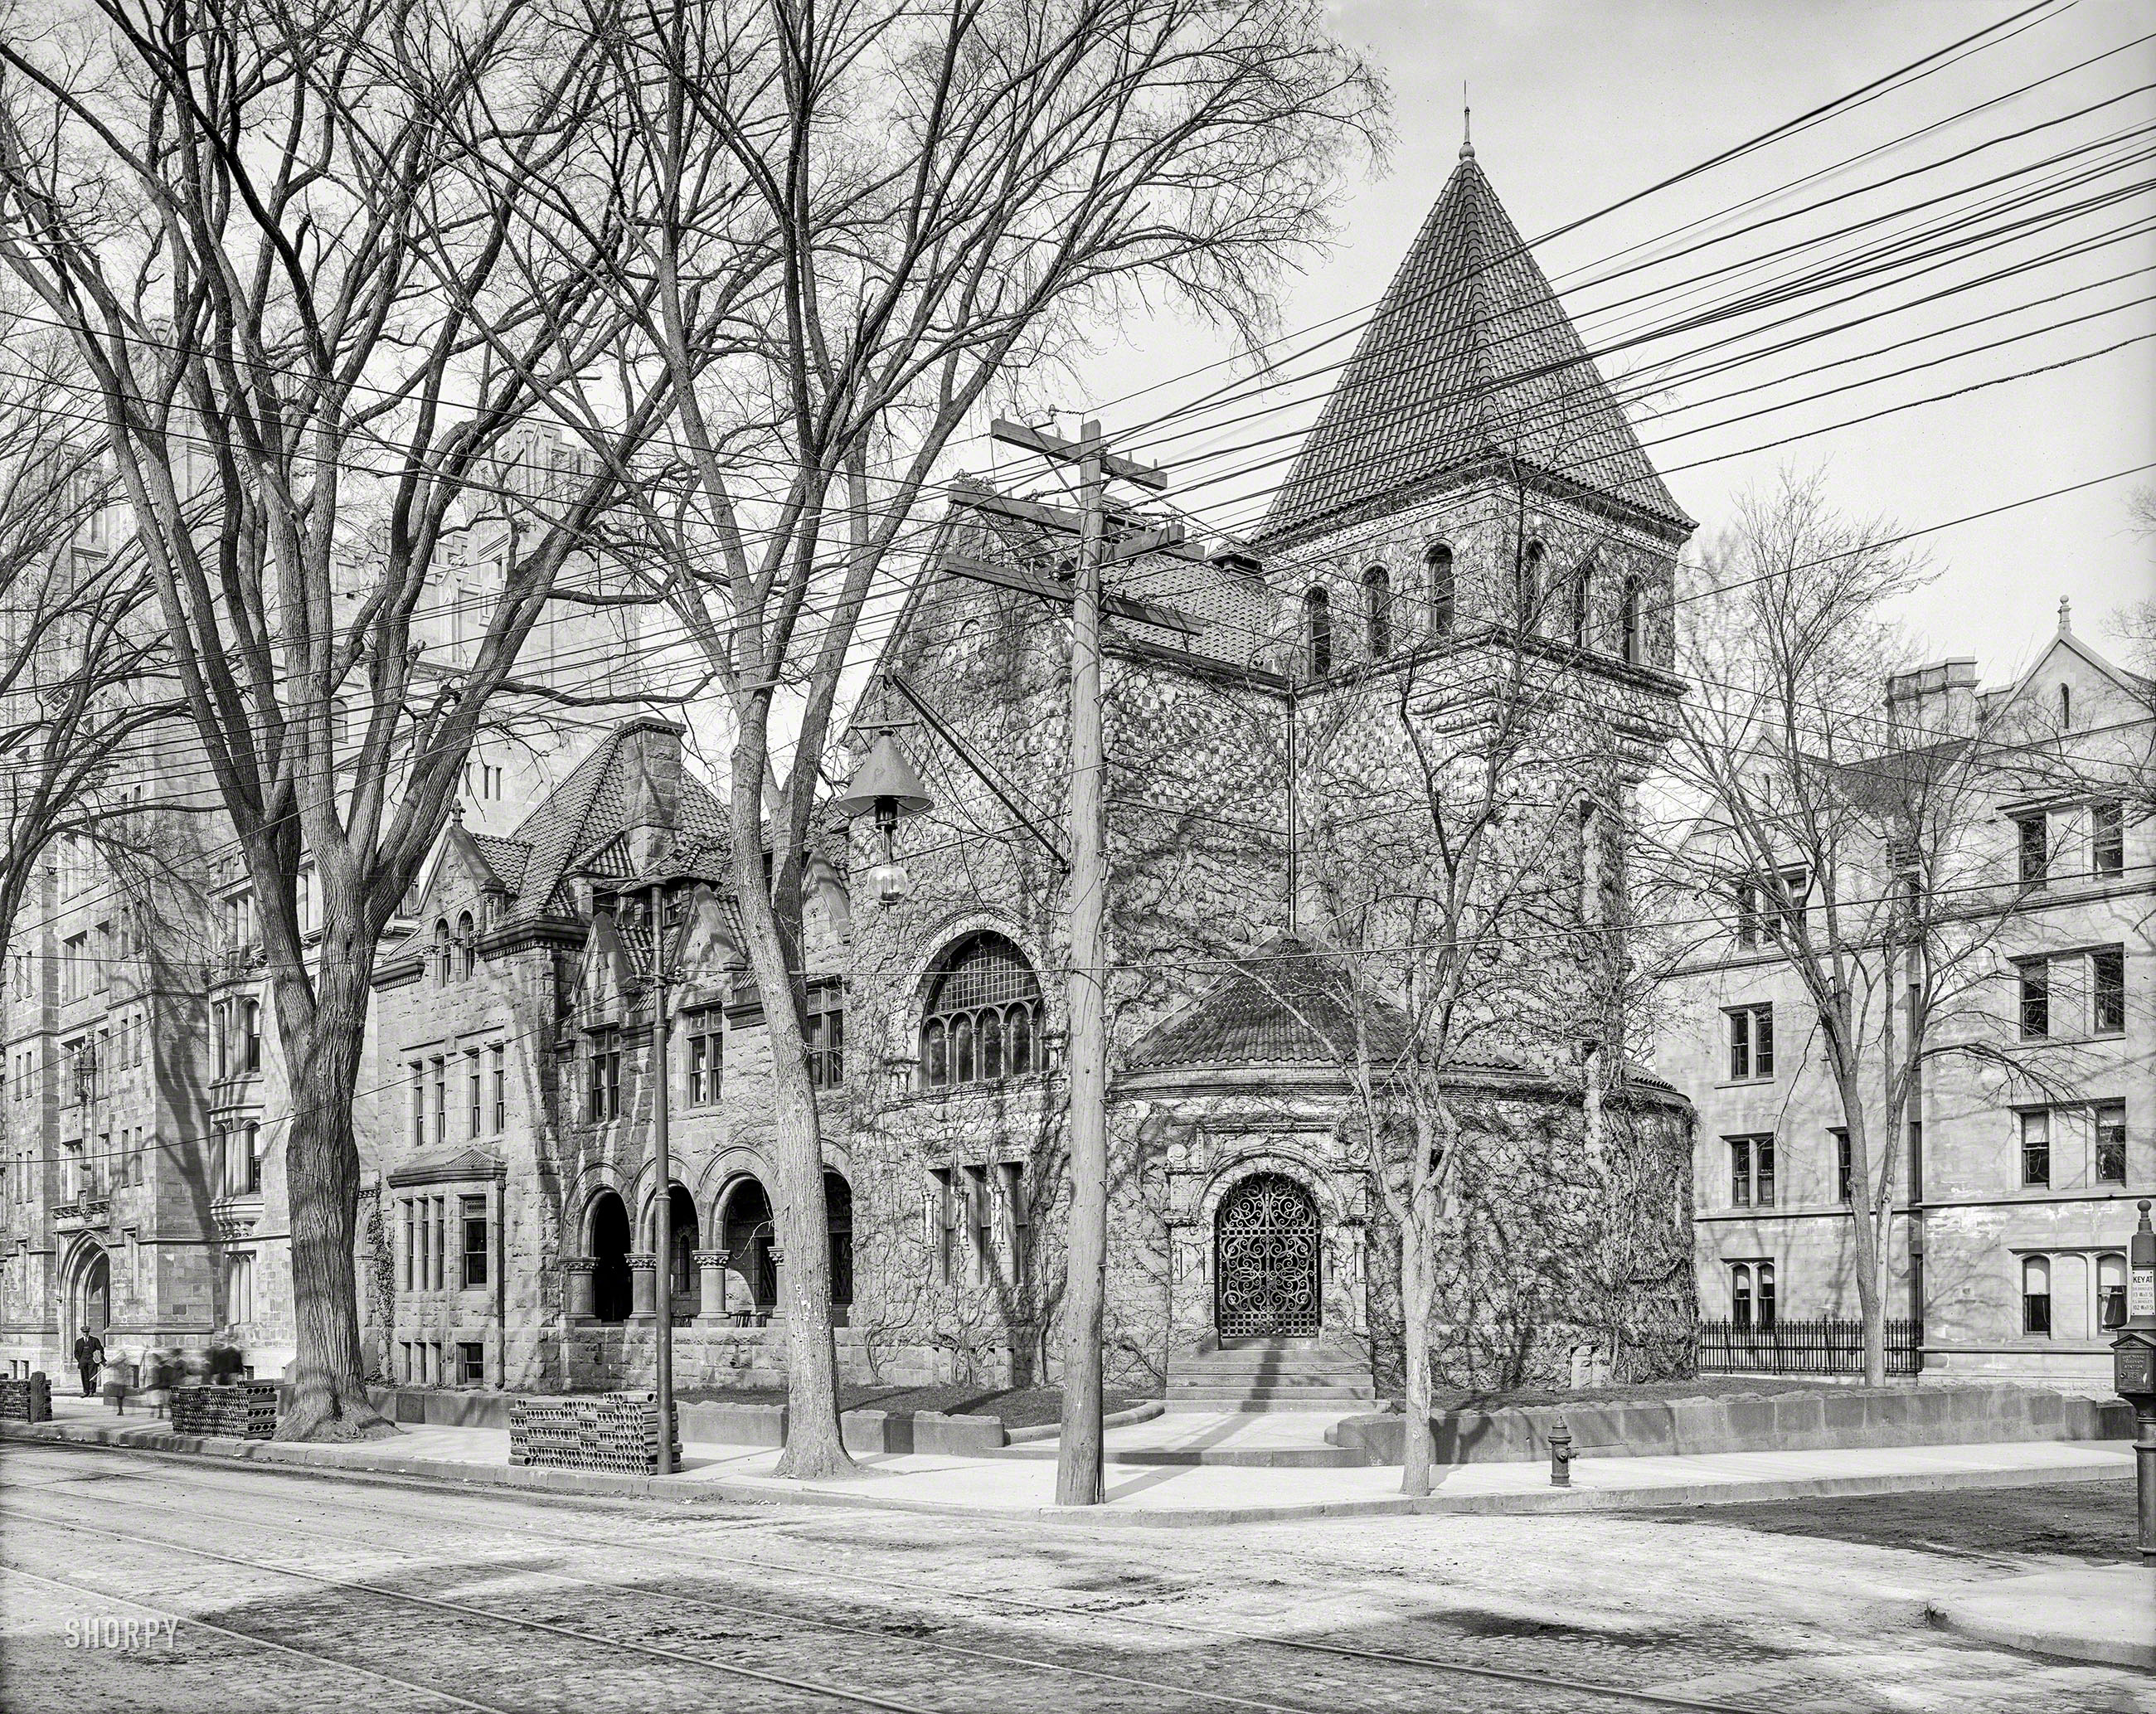 New Haven, Conn., circa 1908. "Delta Psi fraternity house, Yale University." Note the Fire Alarm Telegraph Station at right. 8x10 glass negative. View full size.